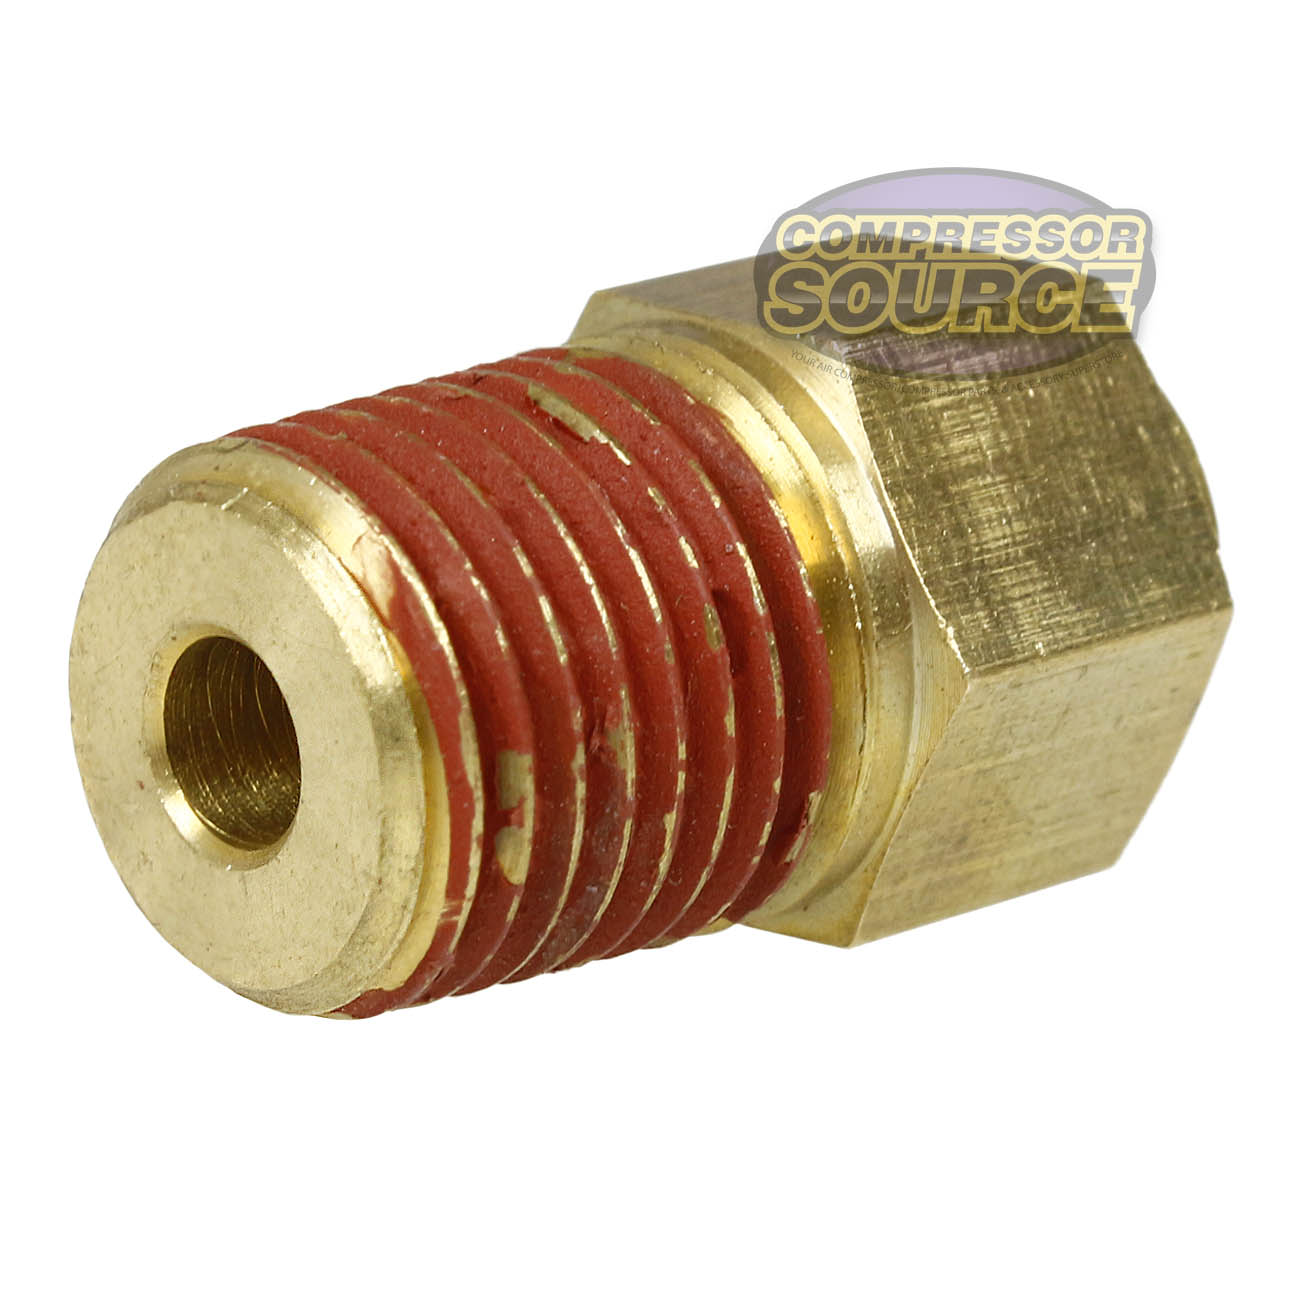 2 Pack 1/4" x 1/4" Male NPTF Push Lock Connector Quick Connect and Disconnect